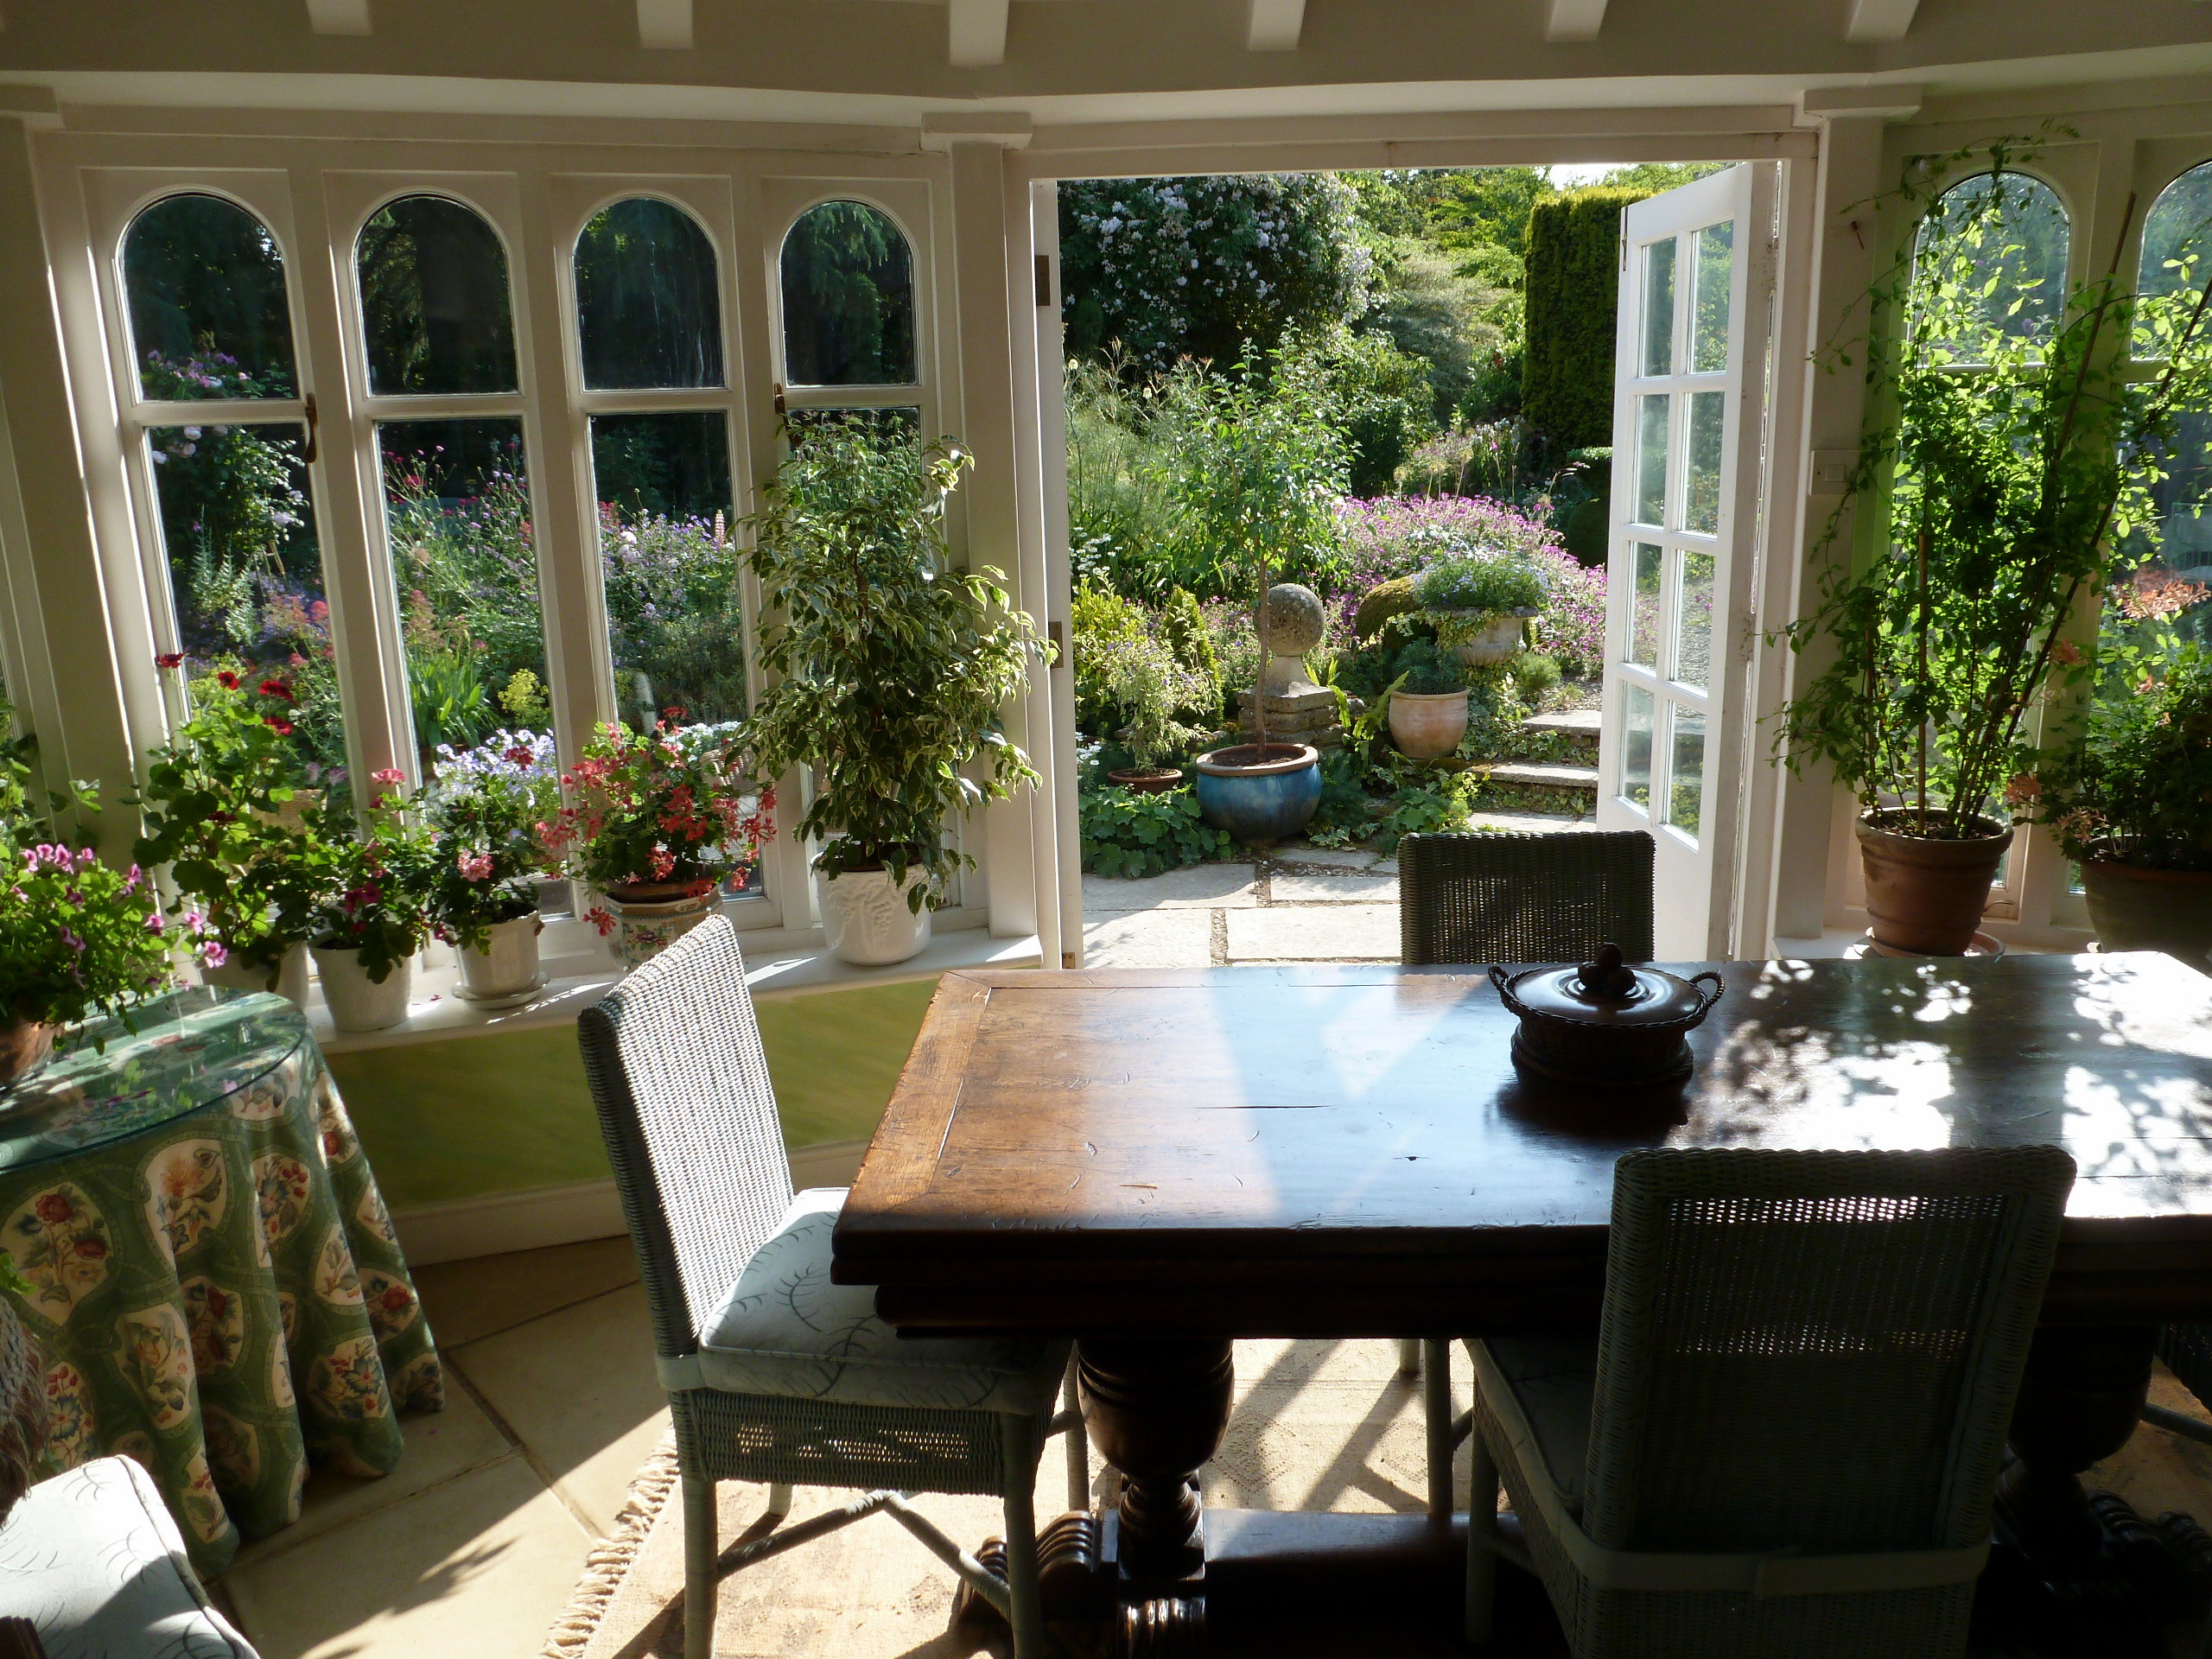 Breakfast and evening meals can be served in the conservatory